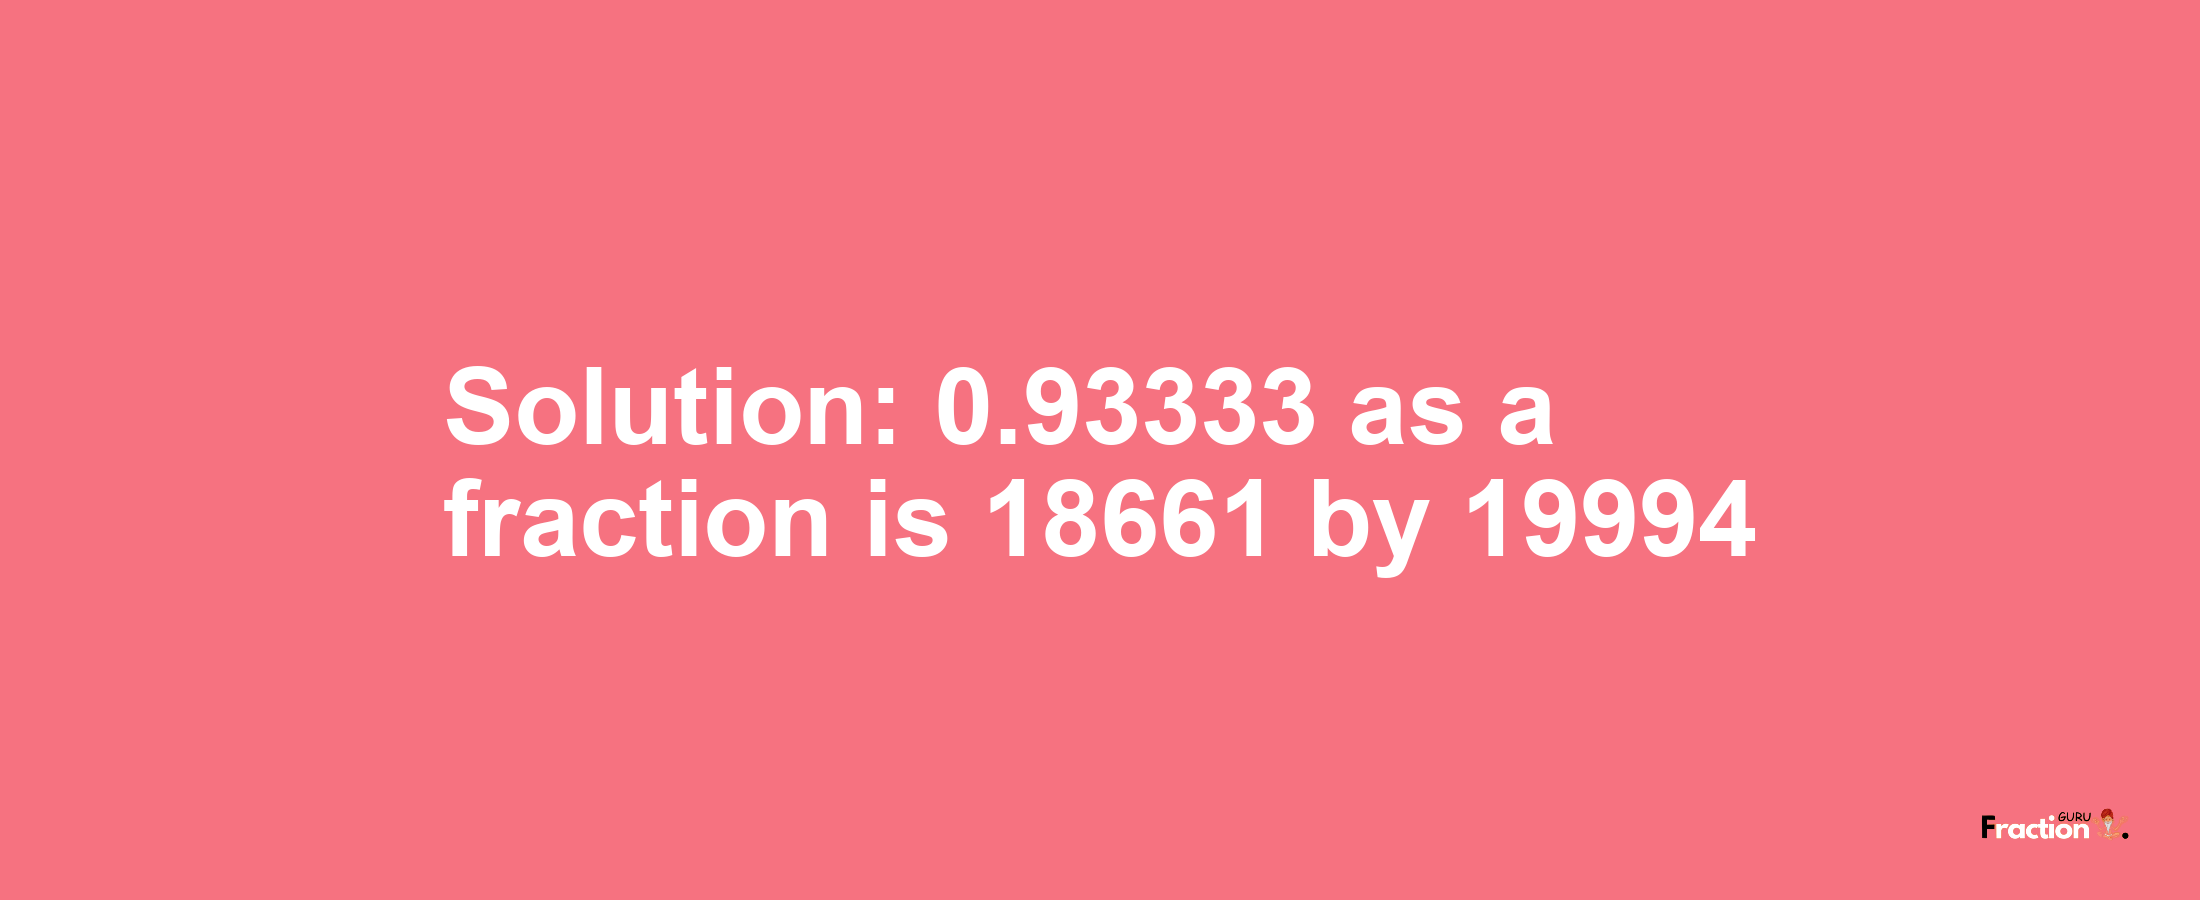 Solution:0.93333 as a fraction is 18661/19994